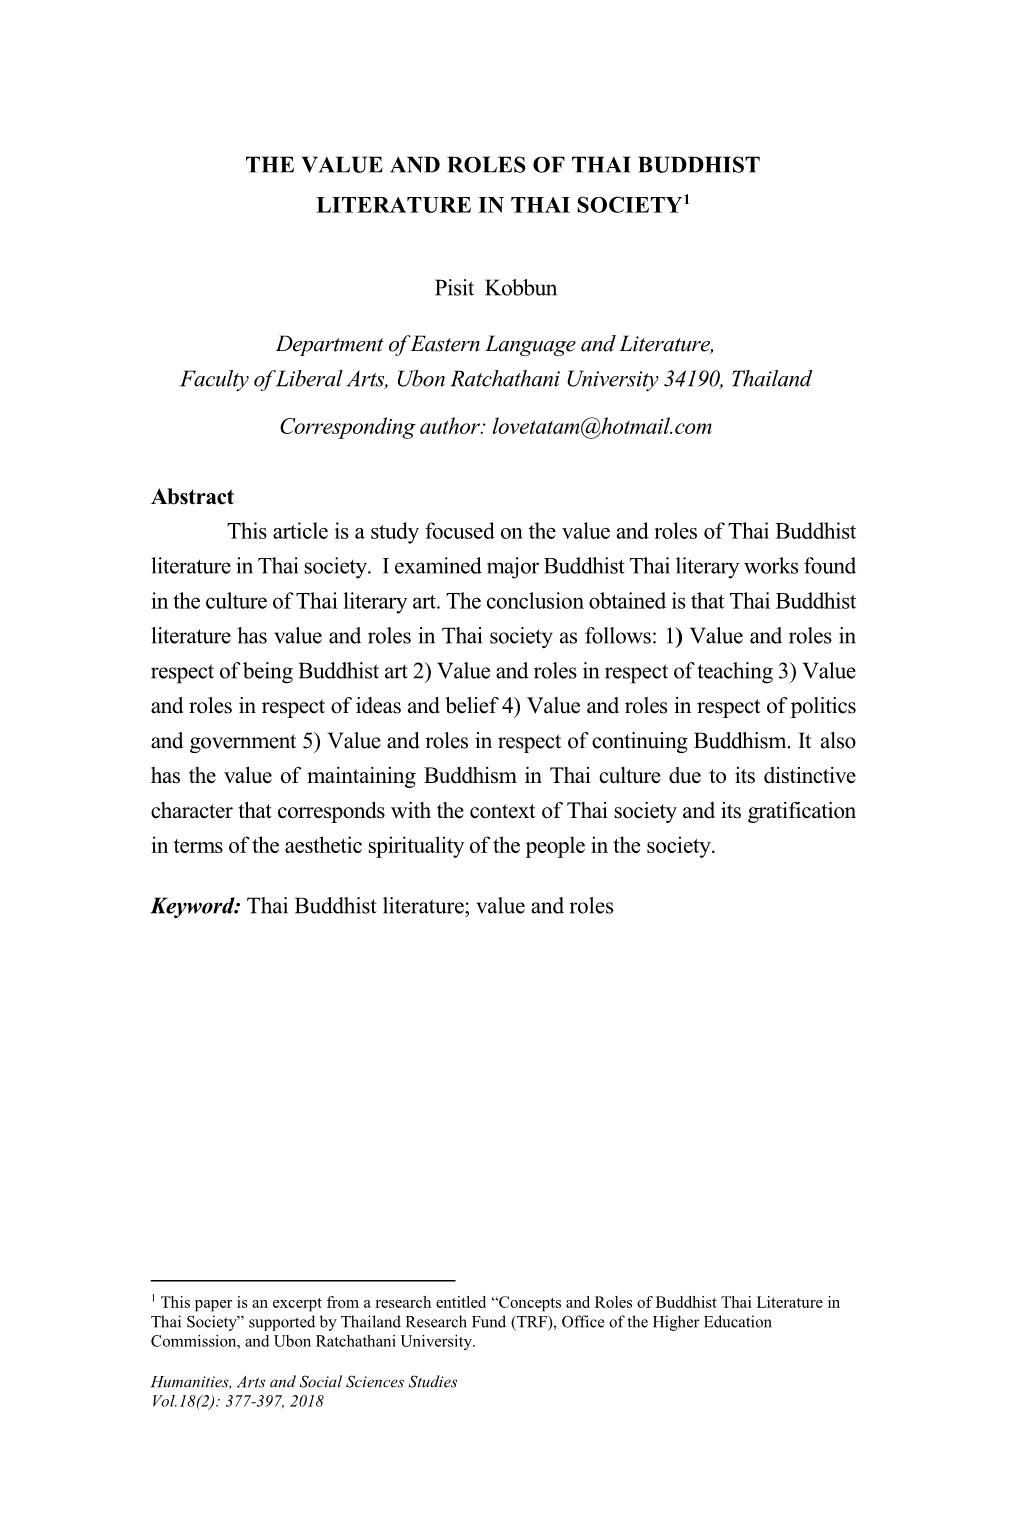 The Value and Roles of Thai Buddhist Literature in Thai Society1